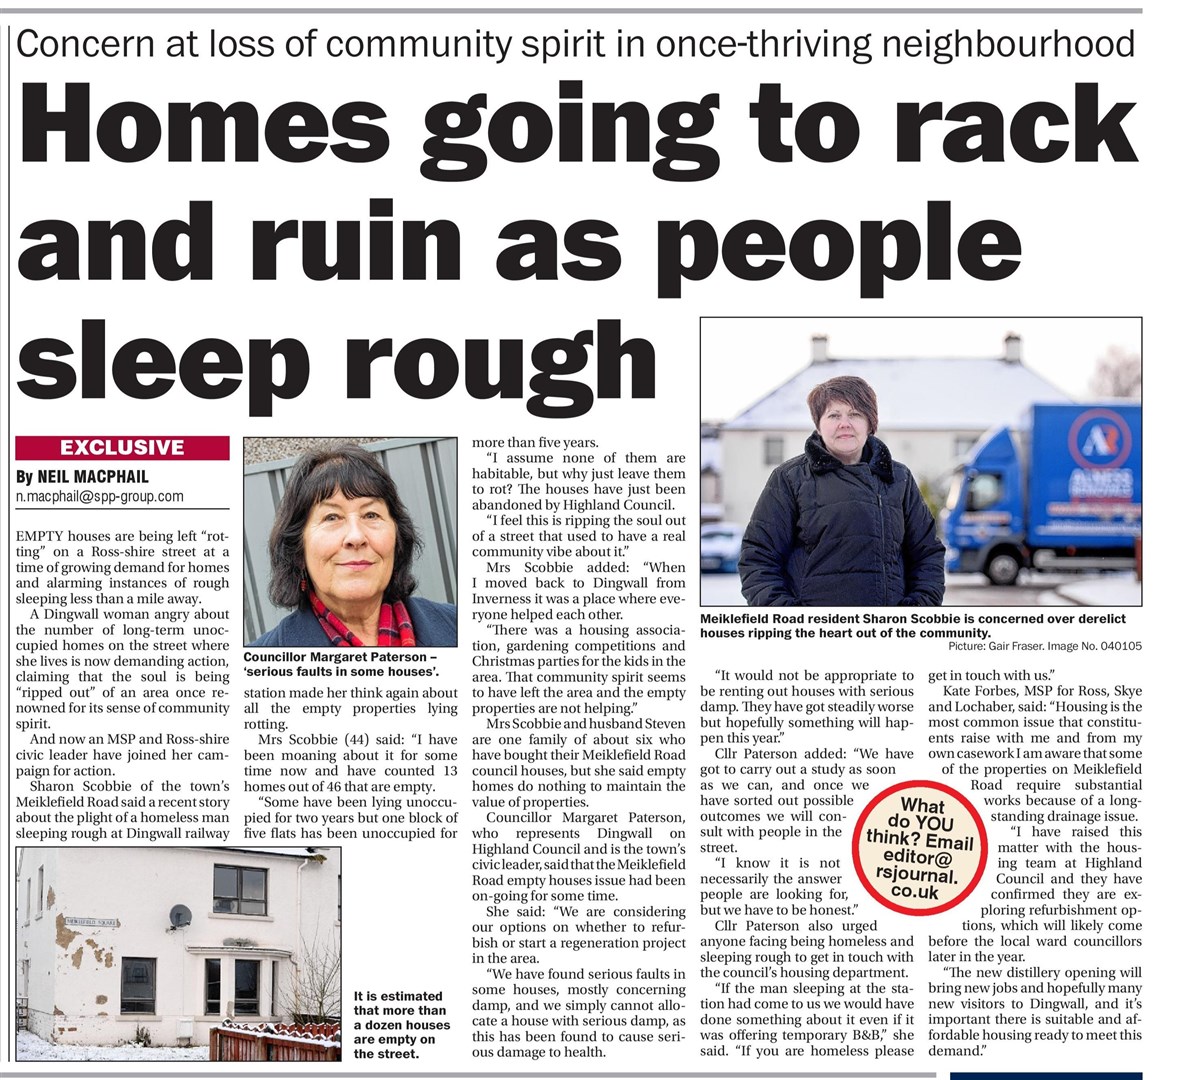 How we first reported local concerns about the waste of a housing resource in January 2018.